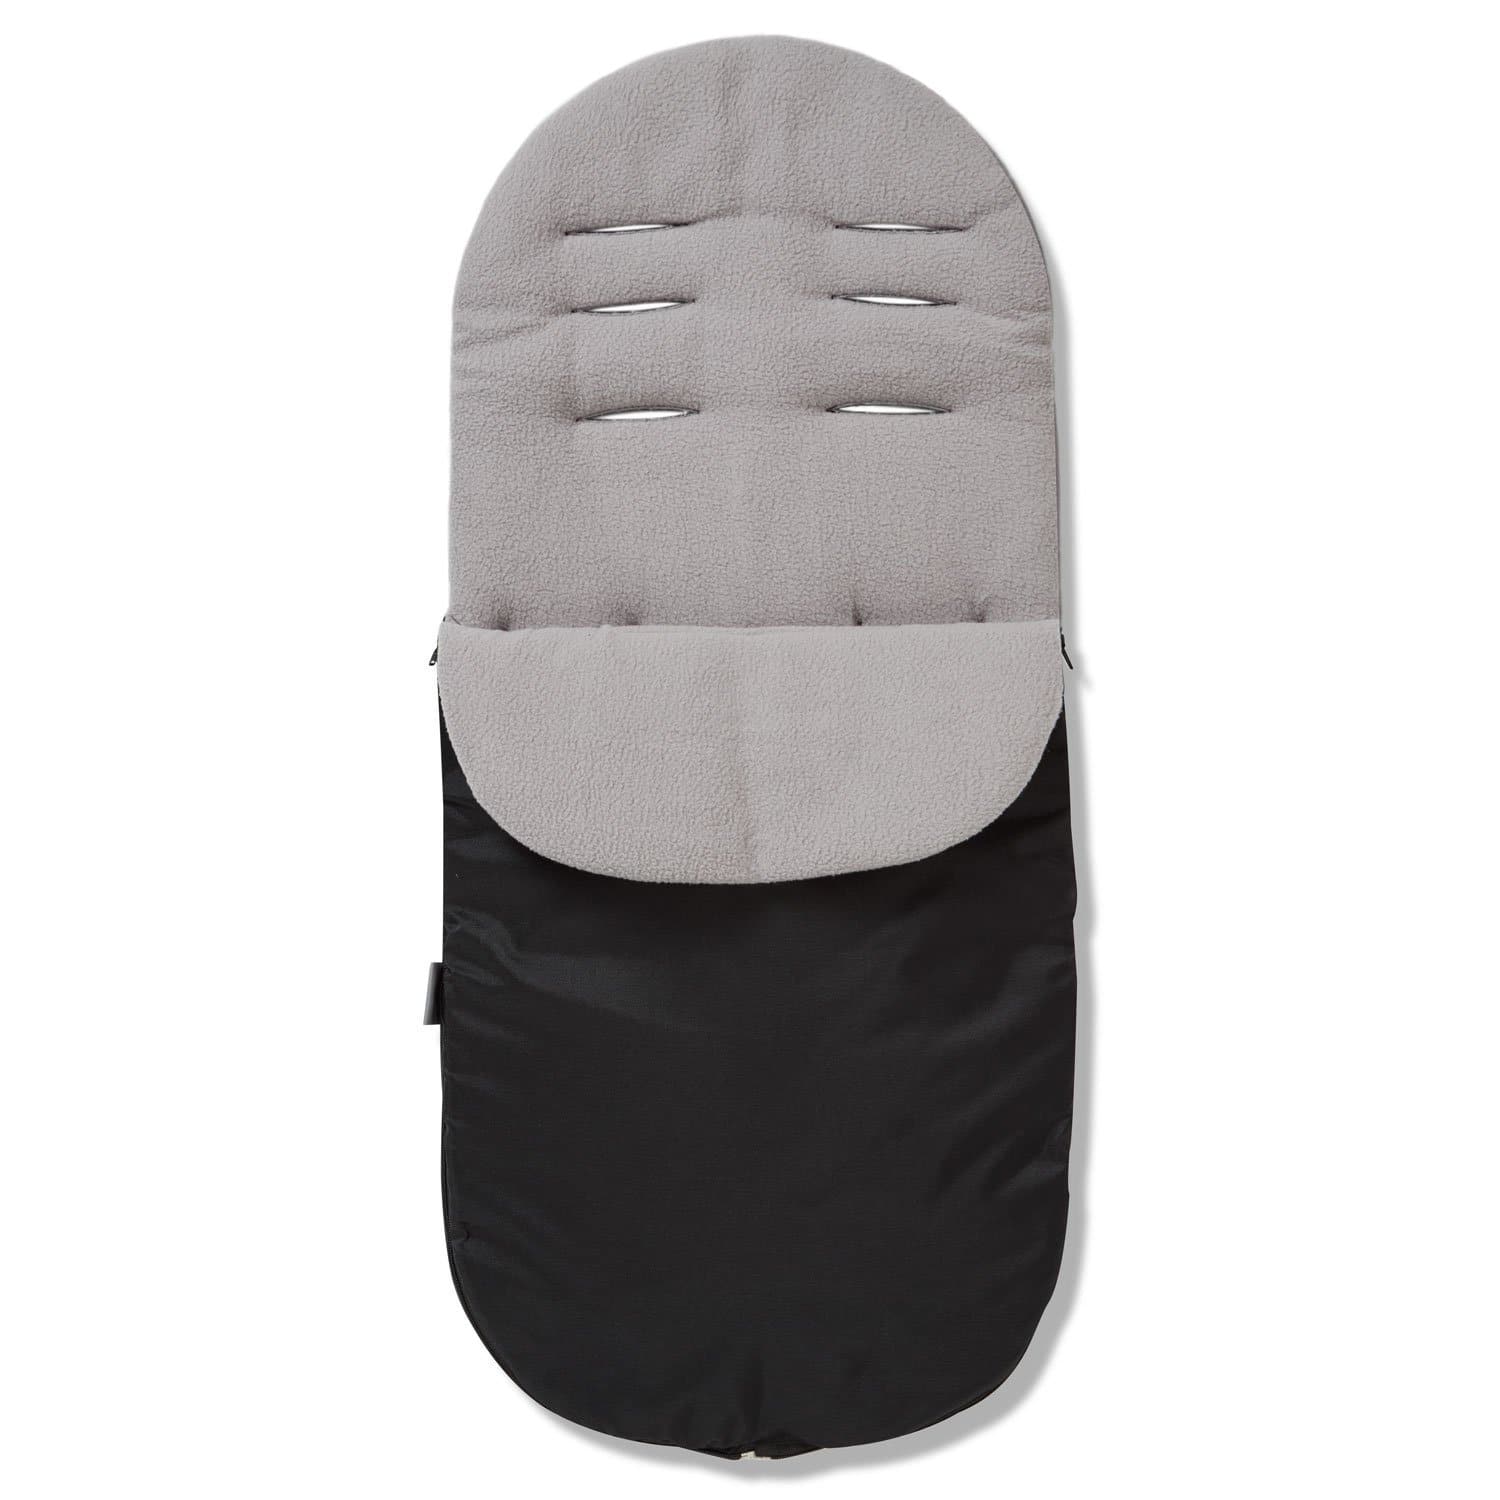 Footmuff / Cosy Toes Compatible with Maclaren - For Your Little One